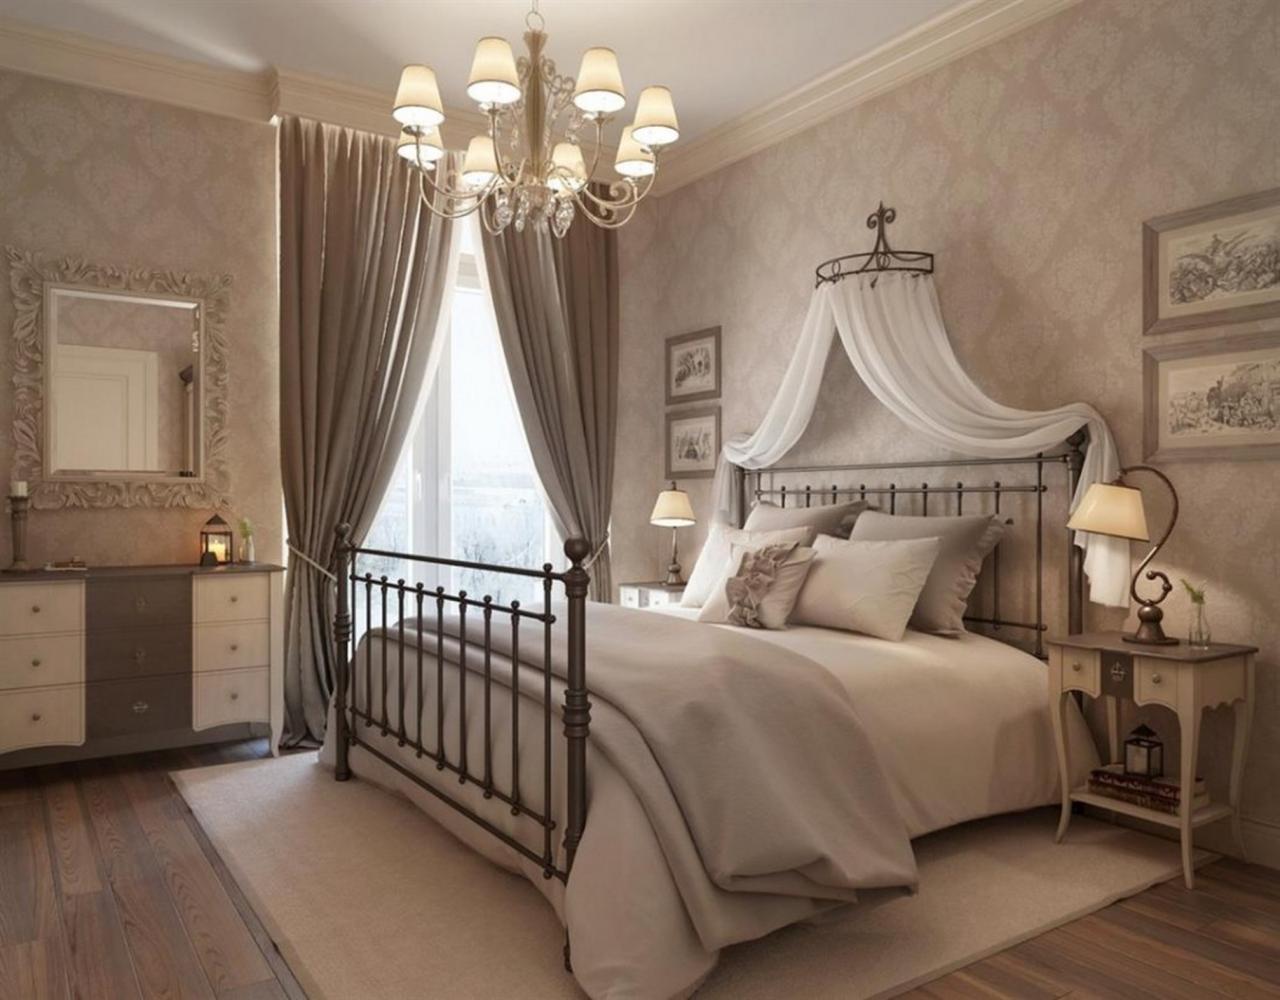 Bedroom classic baroque furniture style bed luxury barocco bedrooms italian gold tables